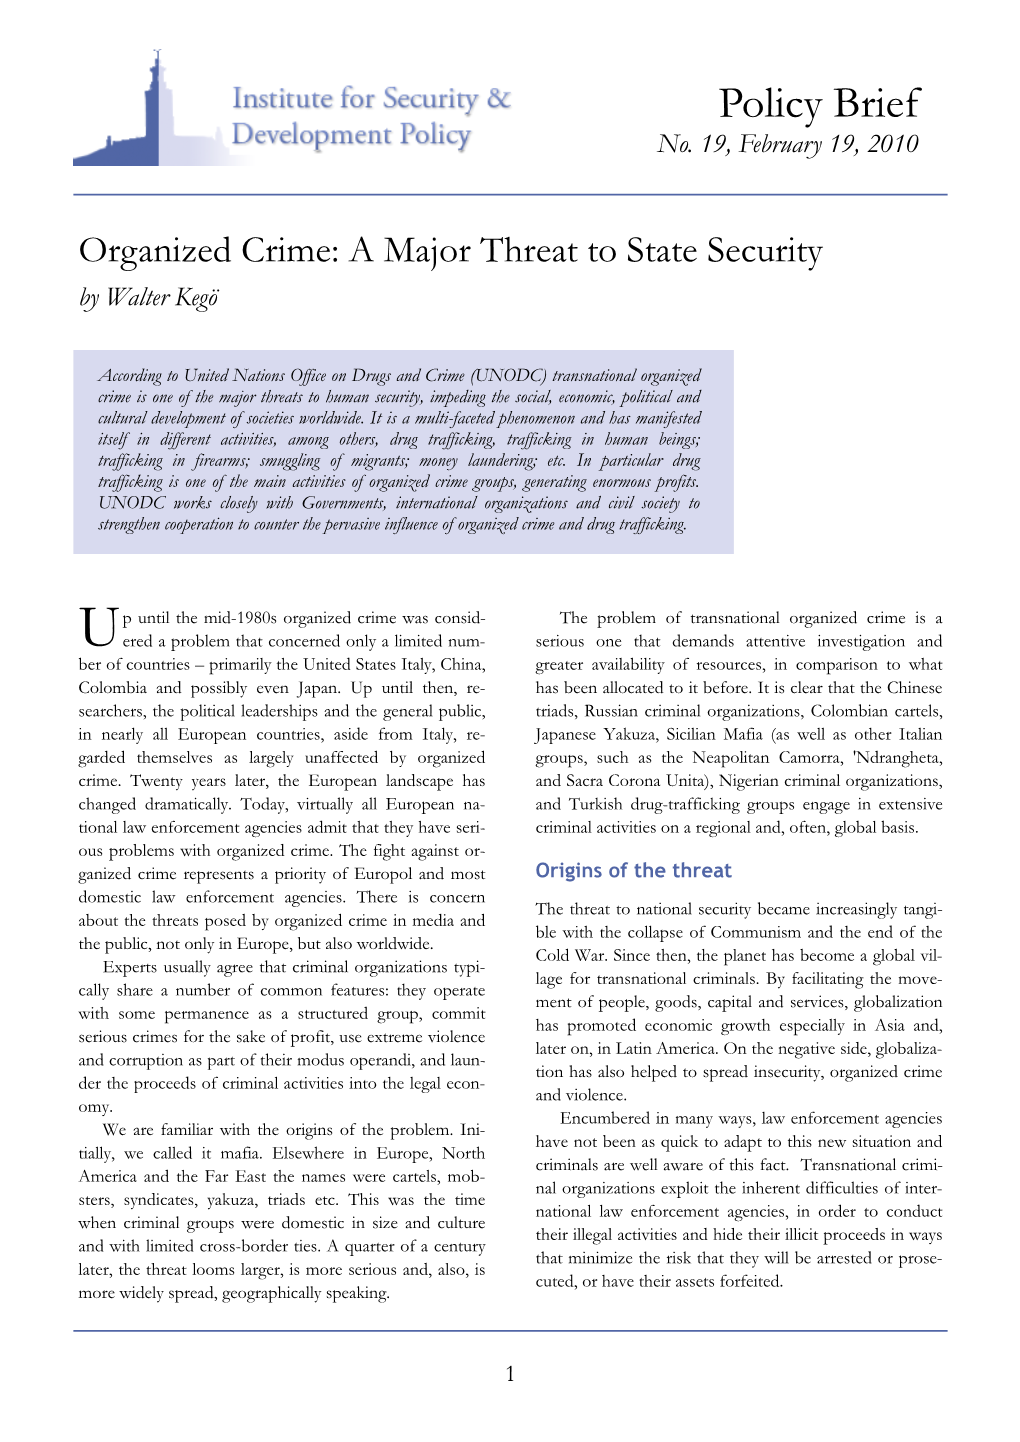 Organized Crime: a Major Threat to State Security by Walter Kegö